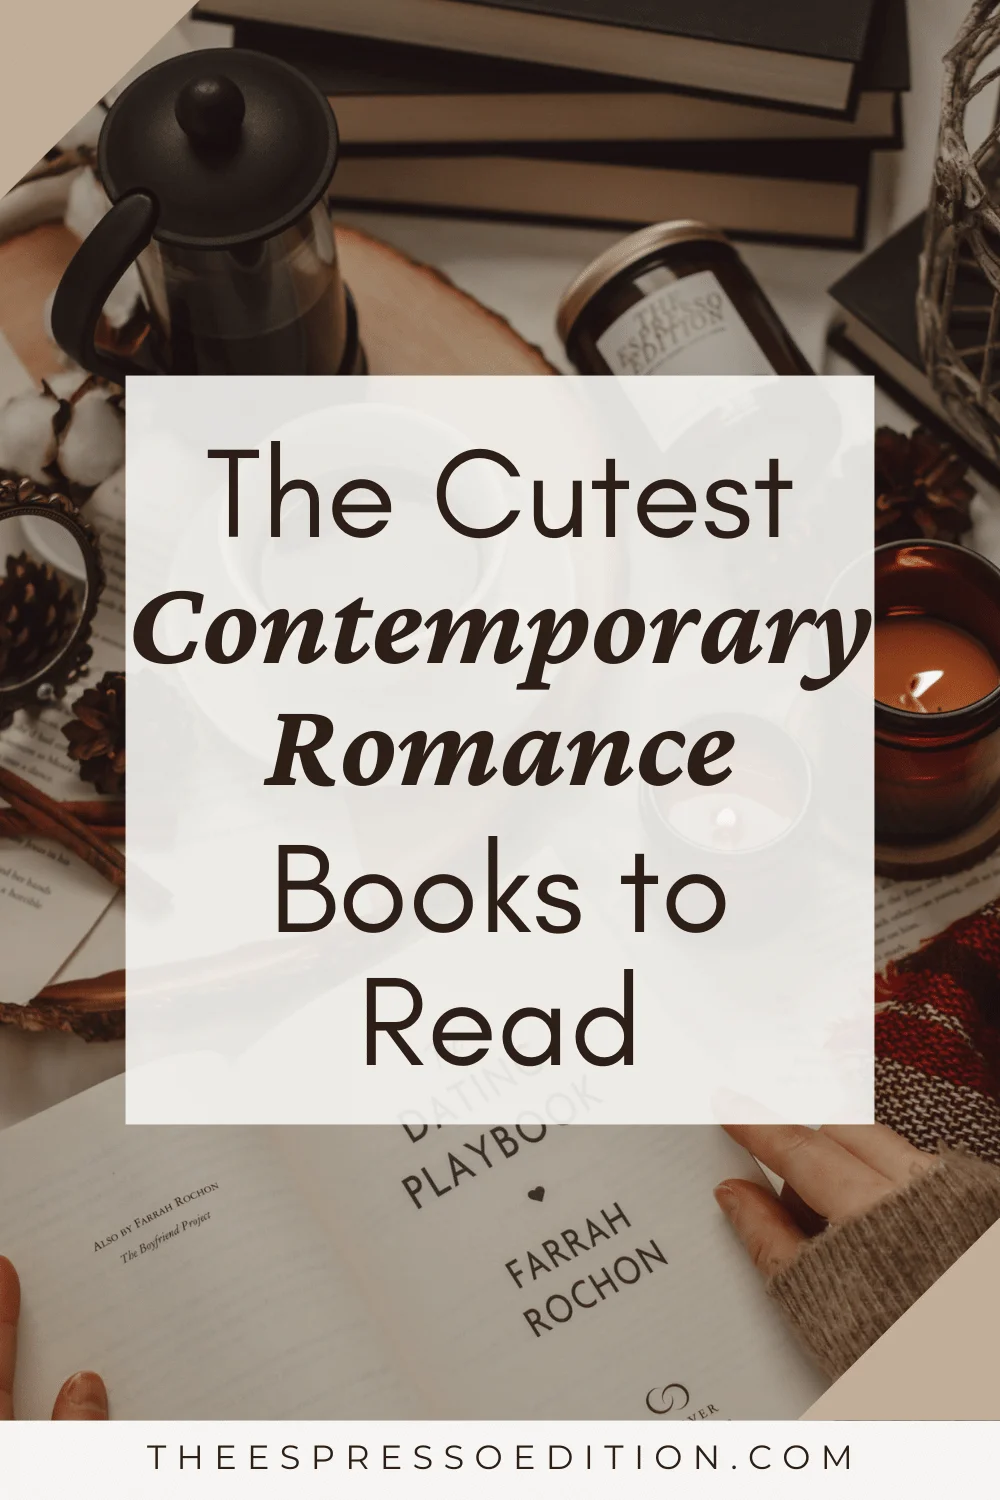 The Cutest Contemporary Romance Books to Read by The Espresso Edition cozy bookish blog